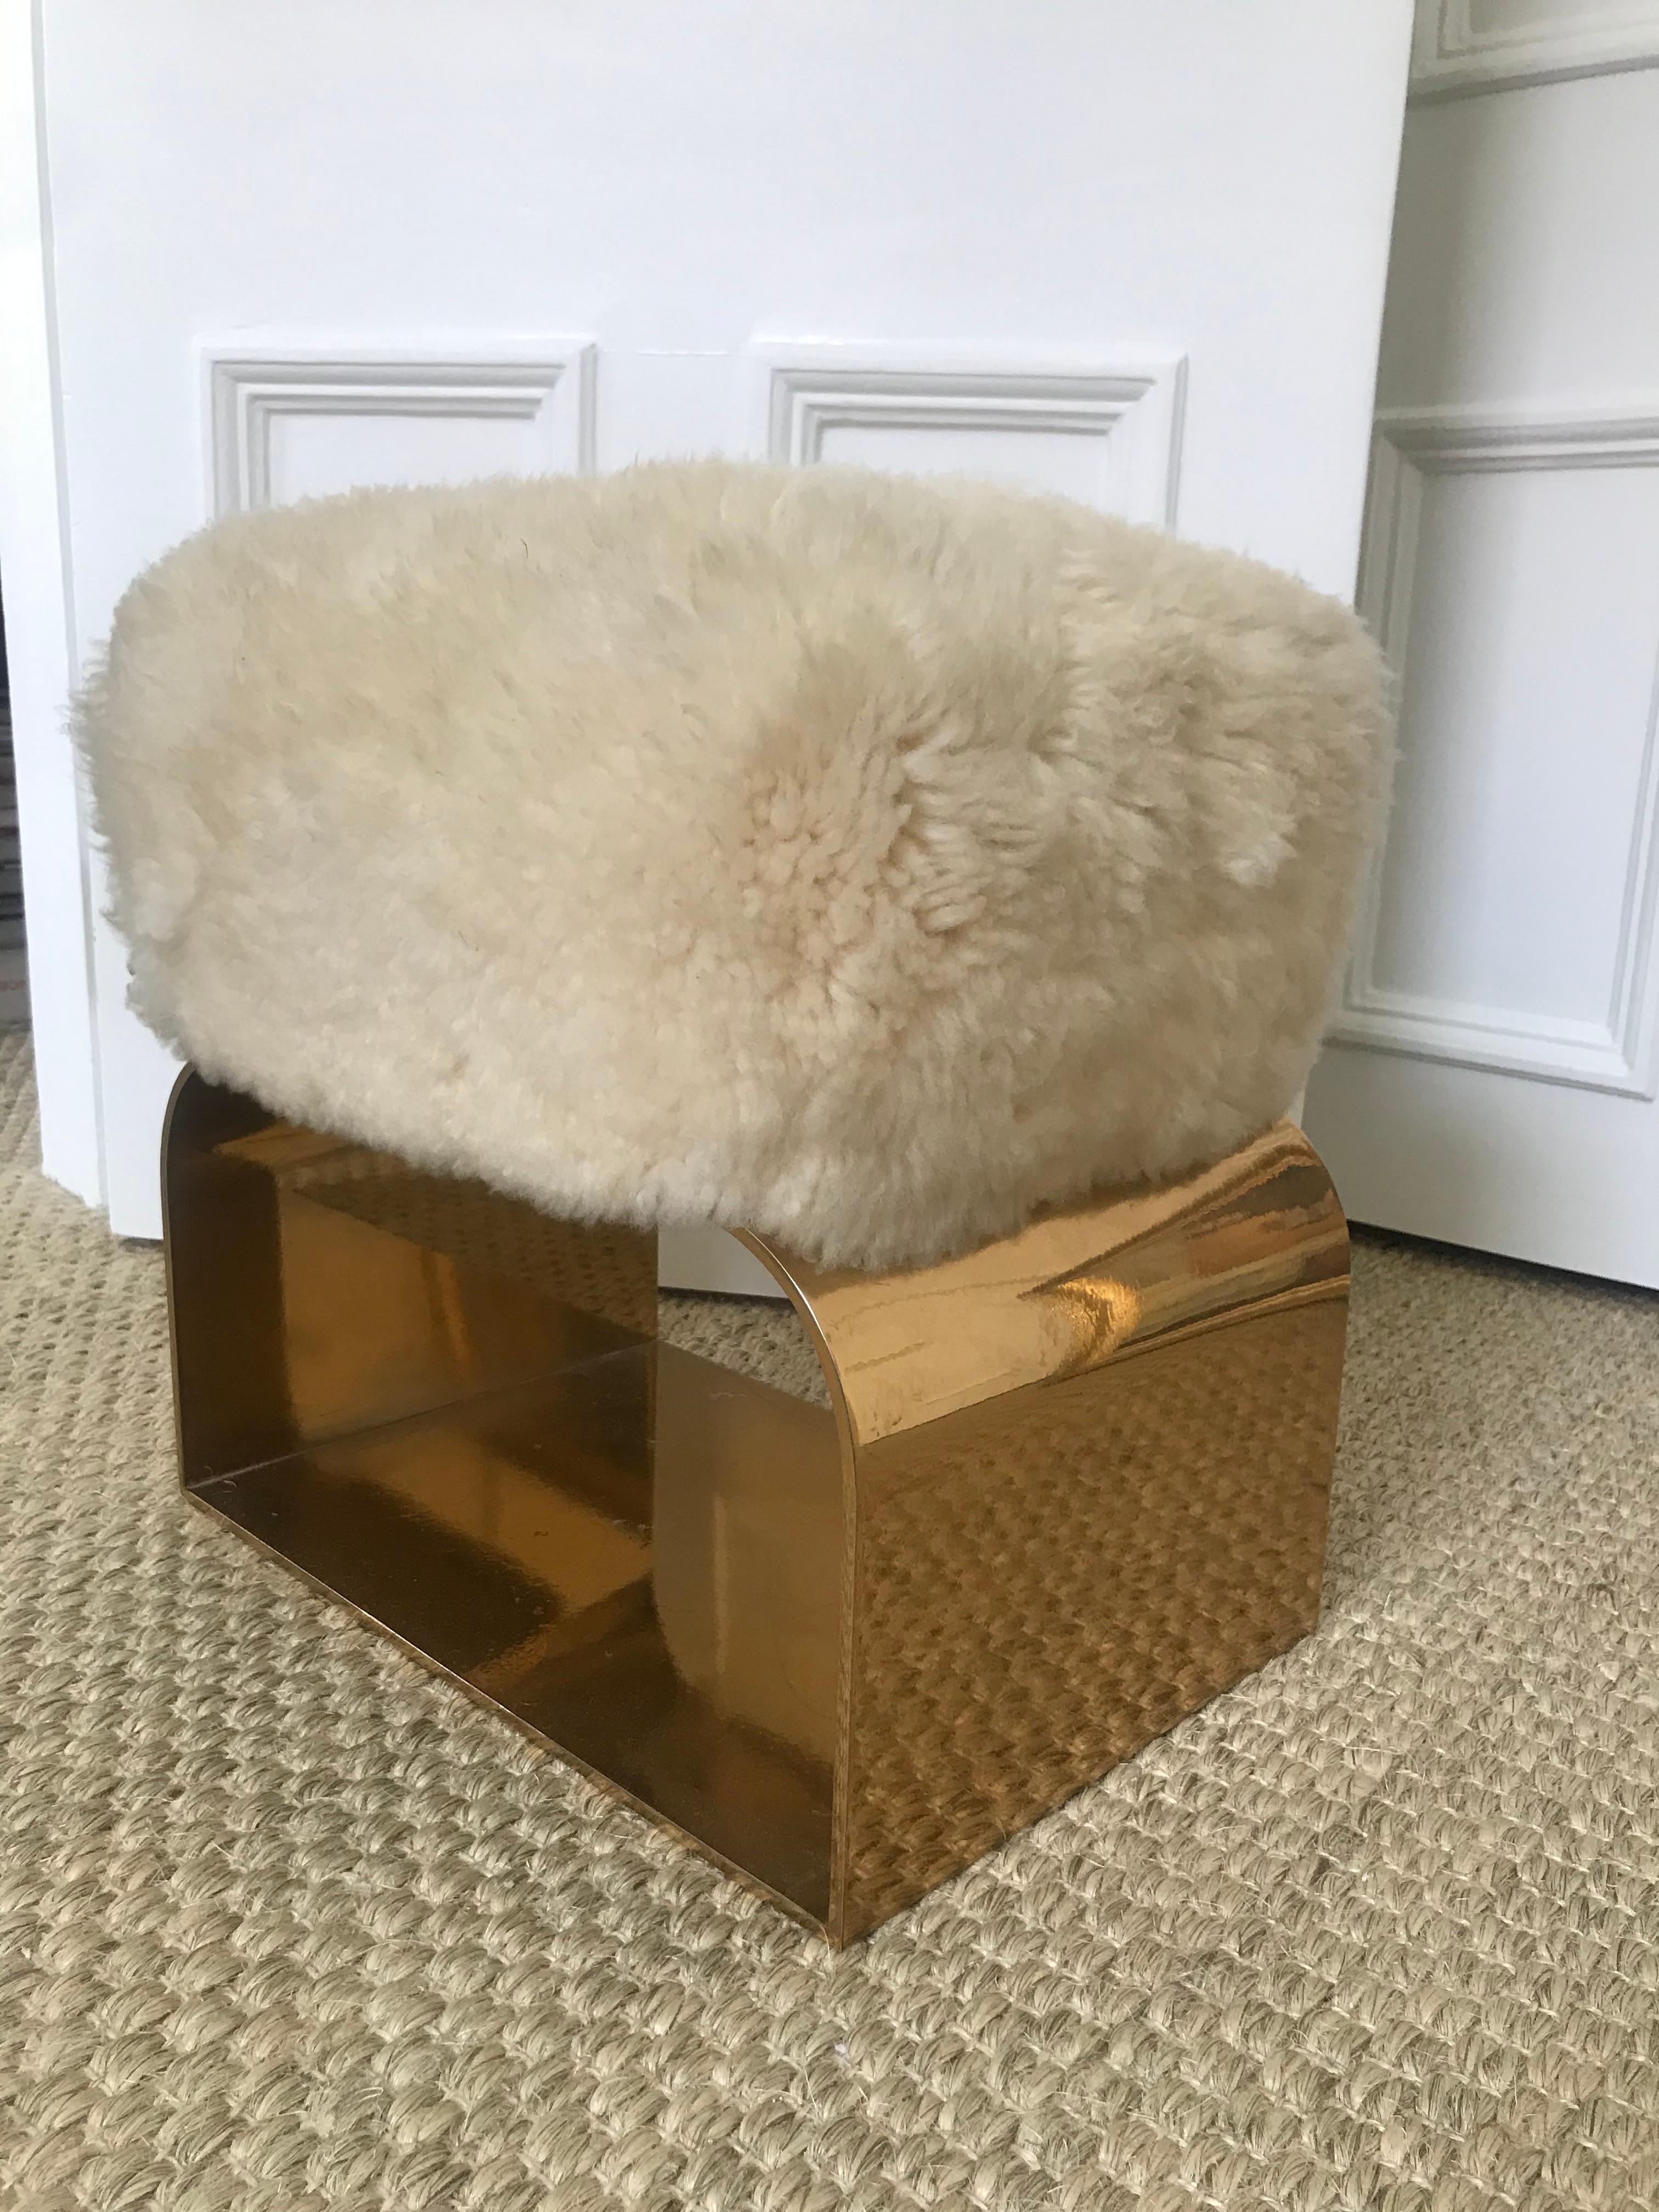 Polished brass base with a natural Patagonian sheepskin top.

NOTE: A tuft of sheepskin is detached as seen in top right corner of last photograph. It could possibly be repaired but may require the whole seat to be reupholstered.